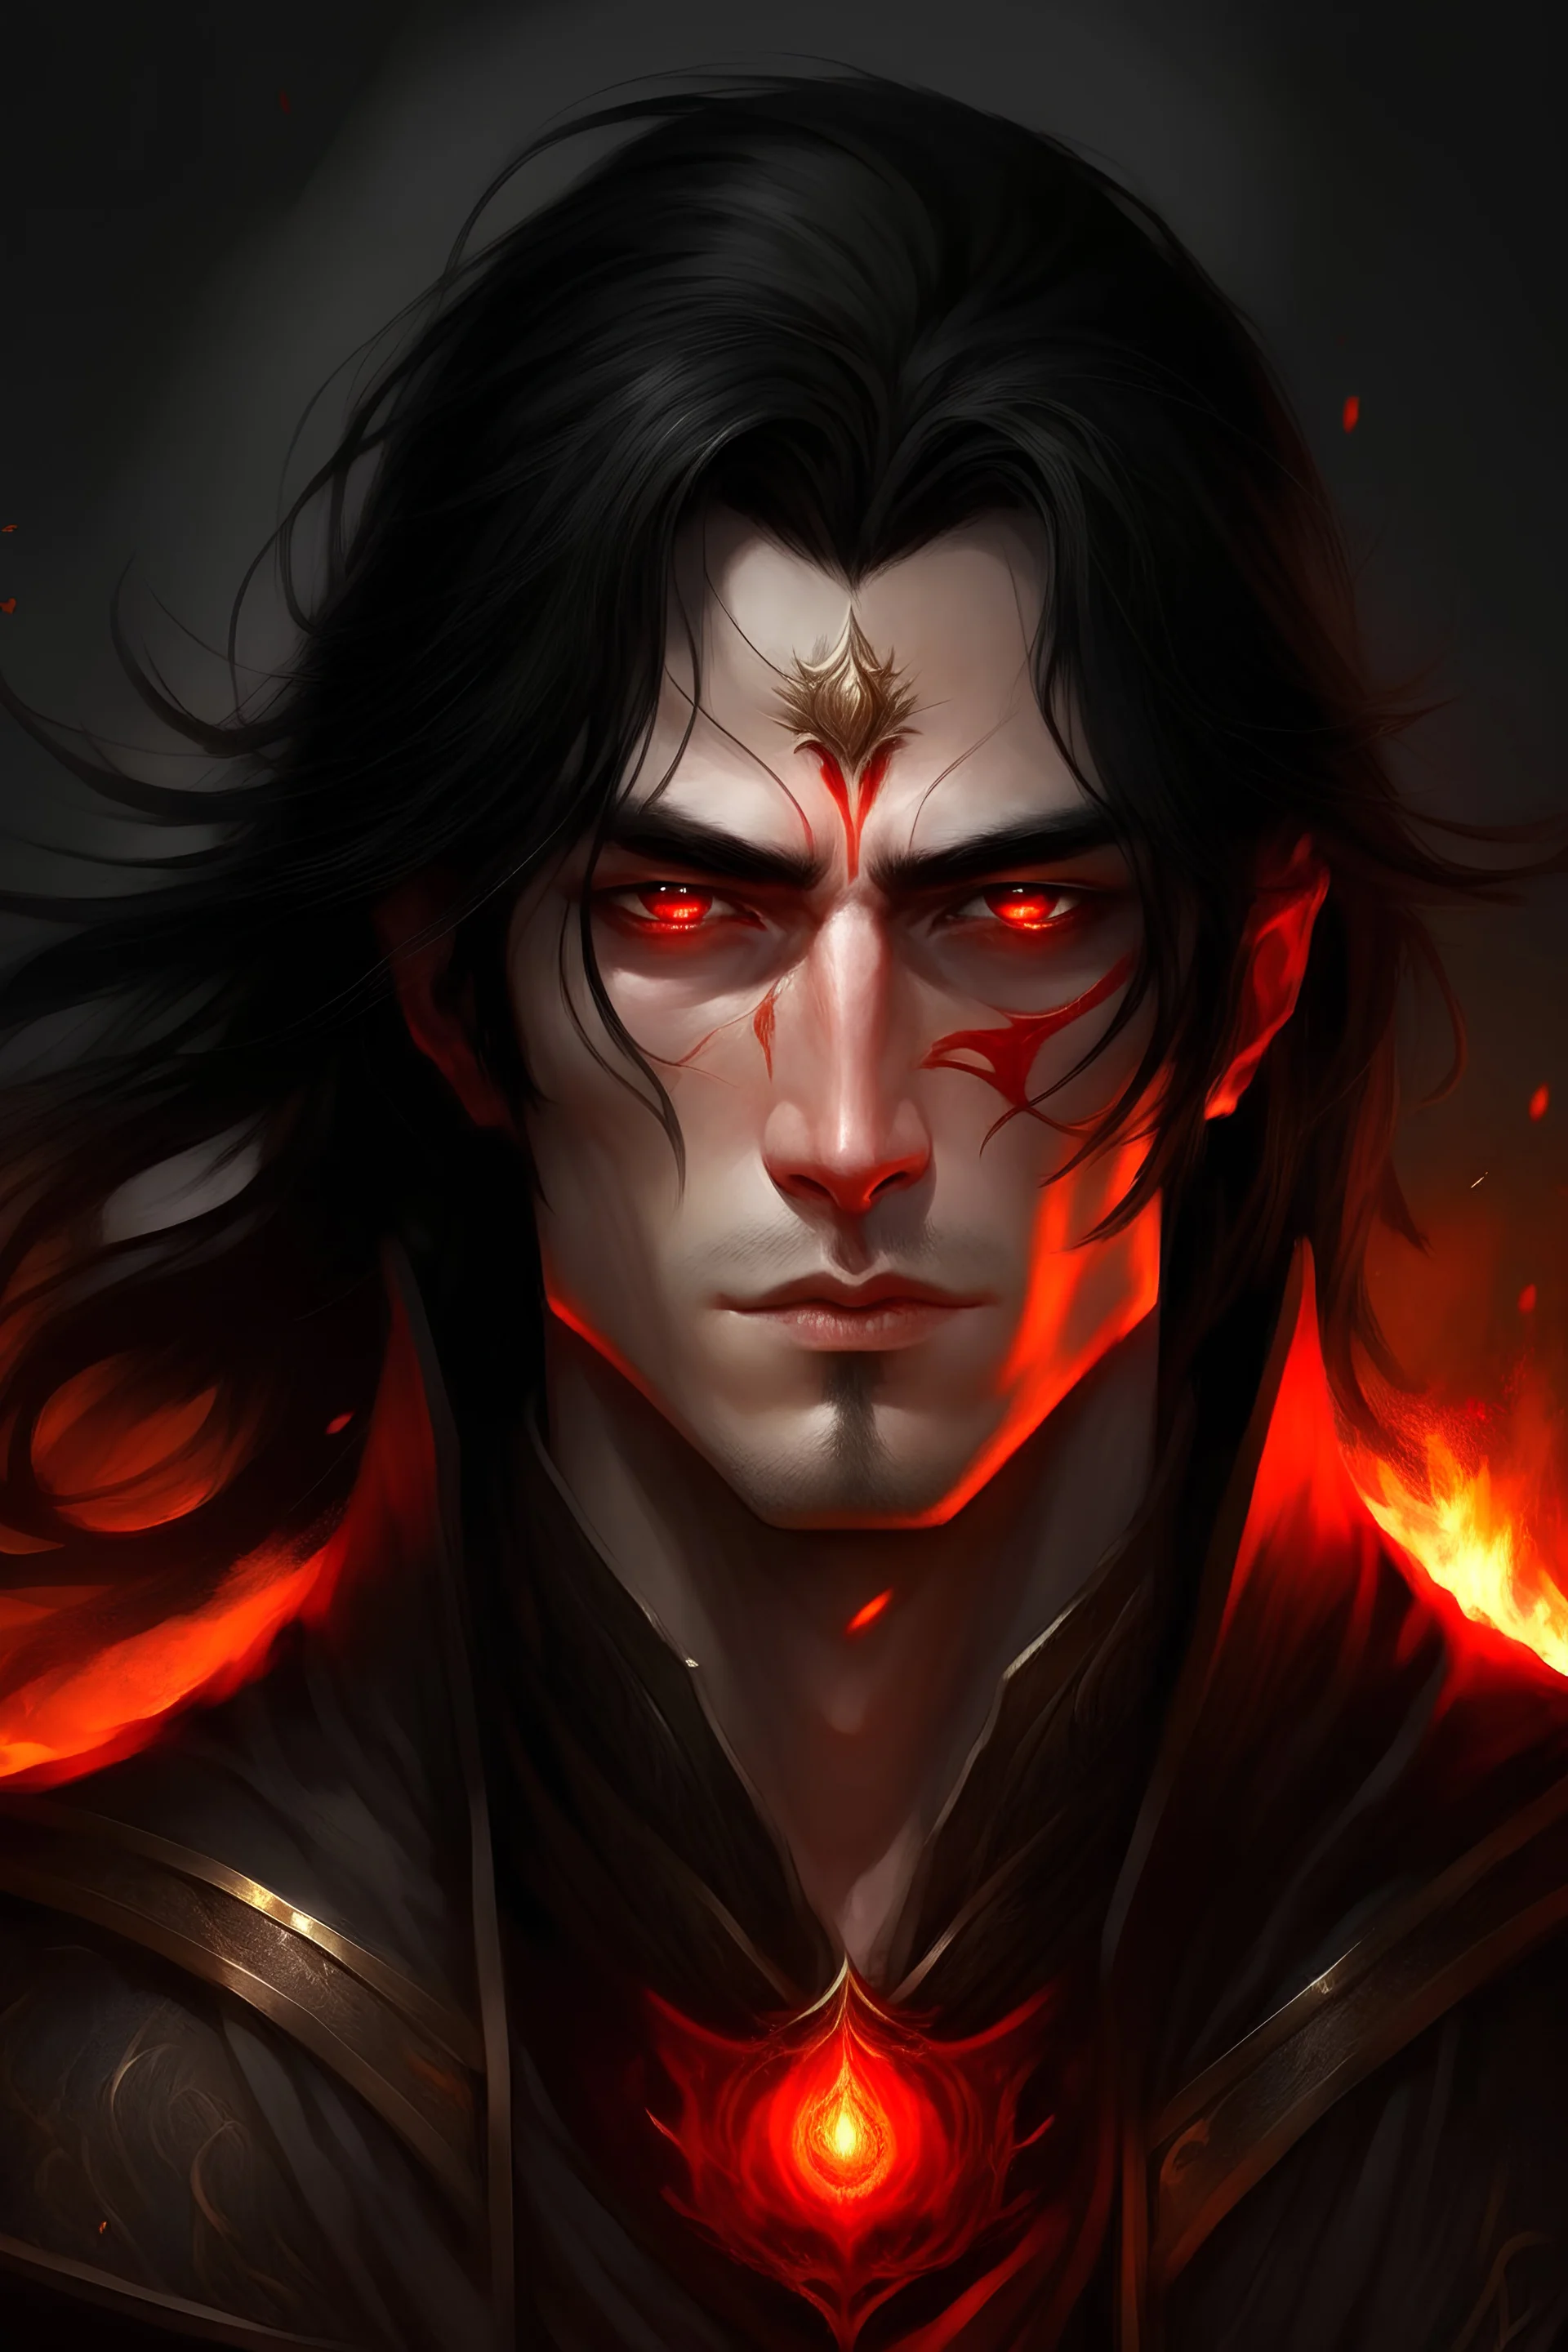 A striking fantasy Lord Of The Rings like man with black hair, exuding an air of fierceness. His fiery red eyes hint at mystery and intelligence.